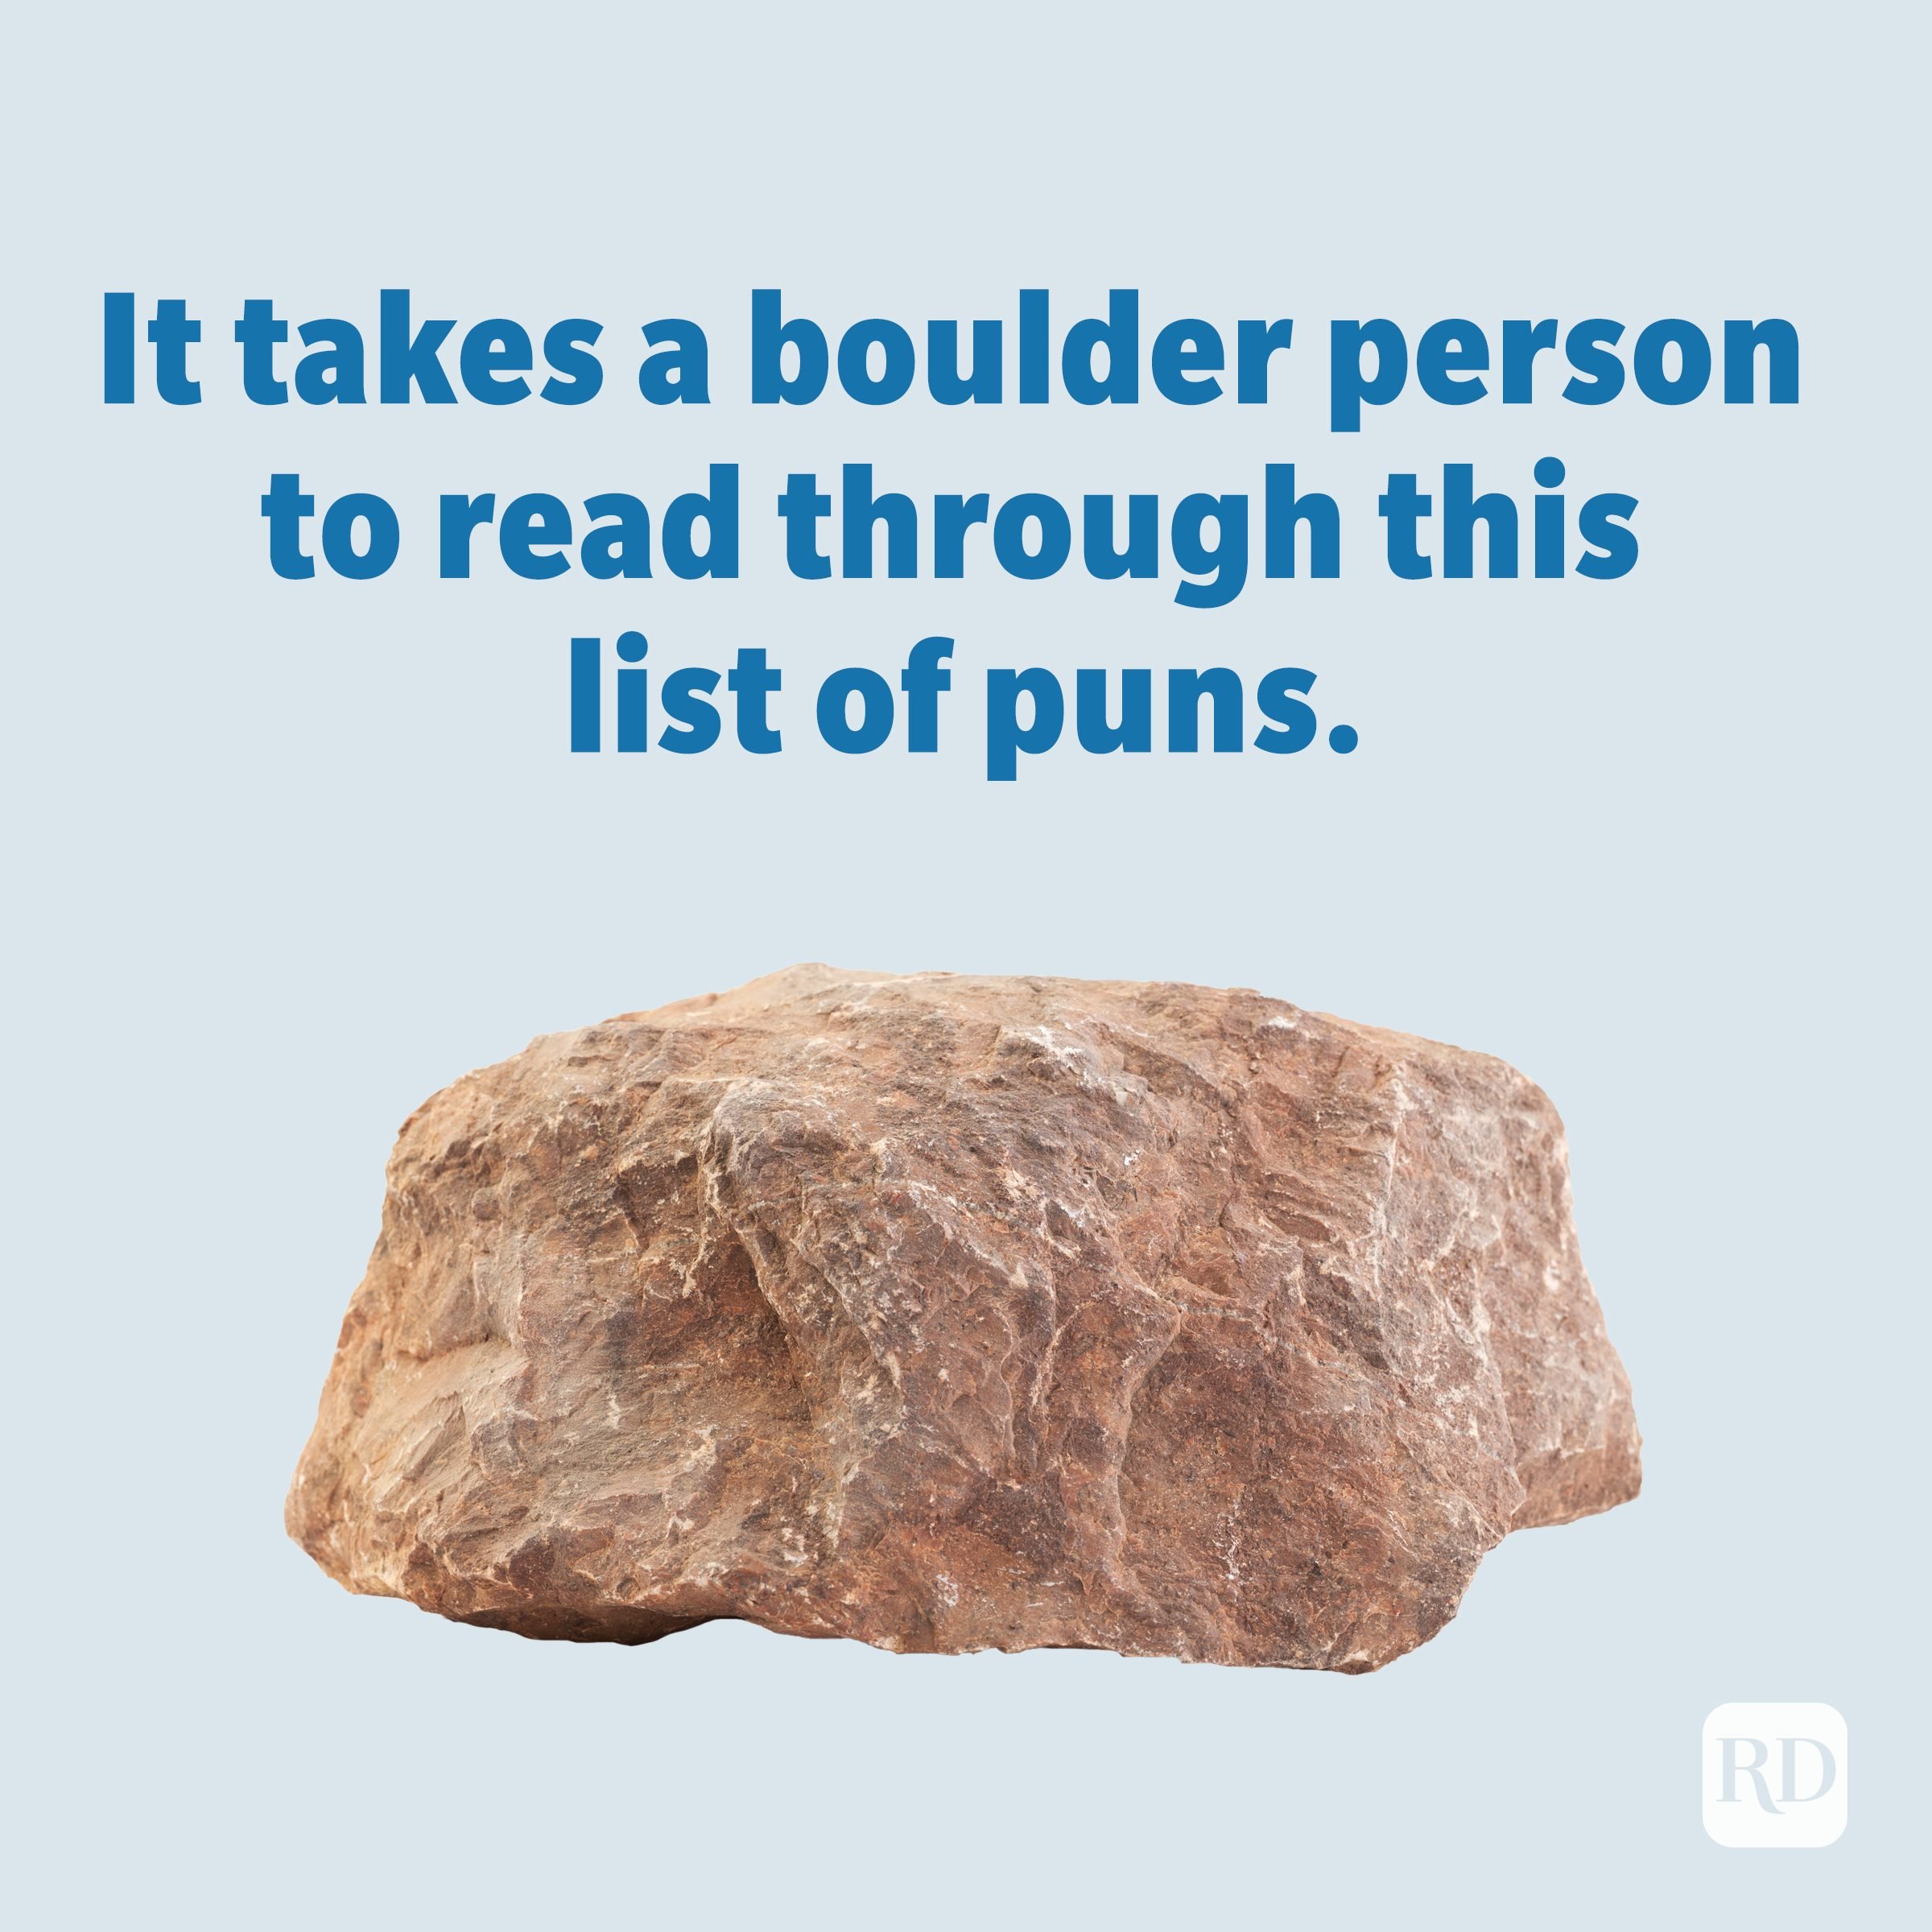 It takes a boulder person to read through this list of rock puns.